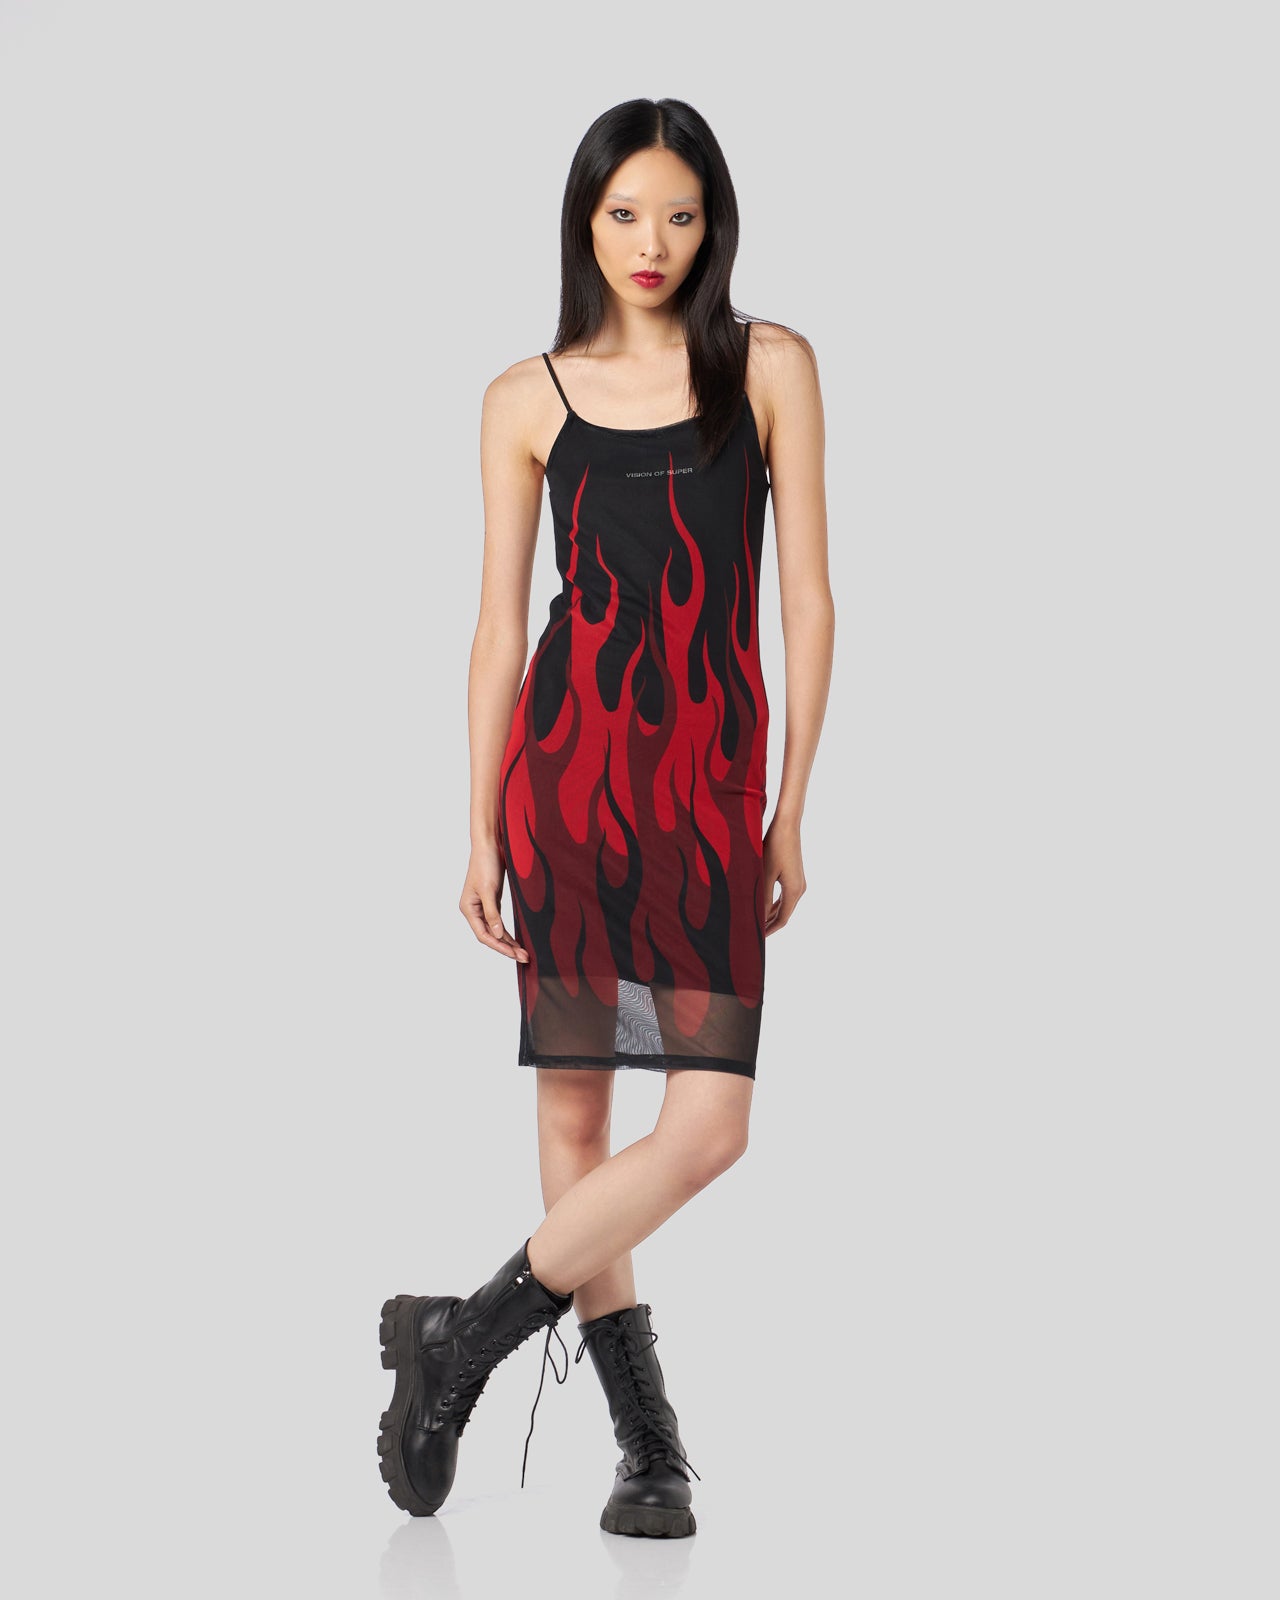 BLACK TULLE DRESS WITH RED FLAMES